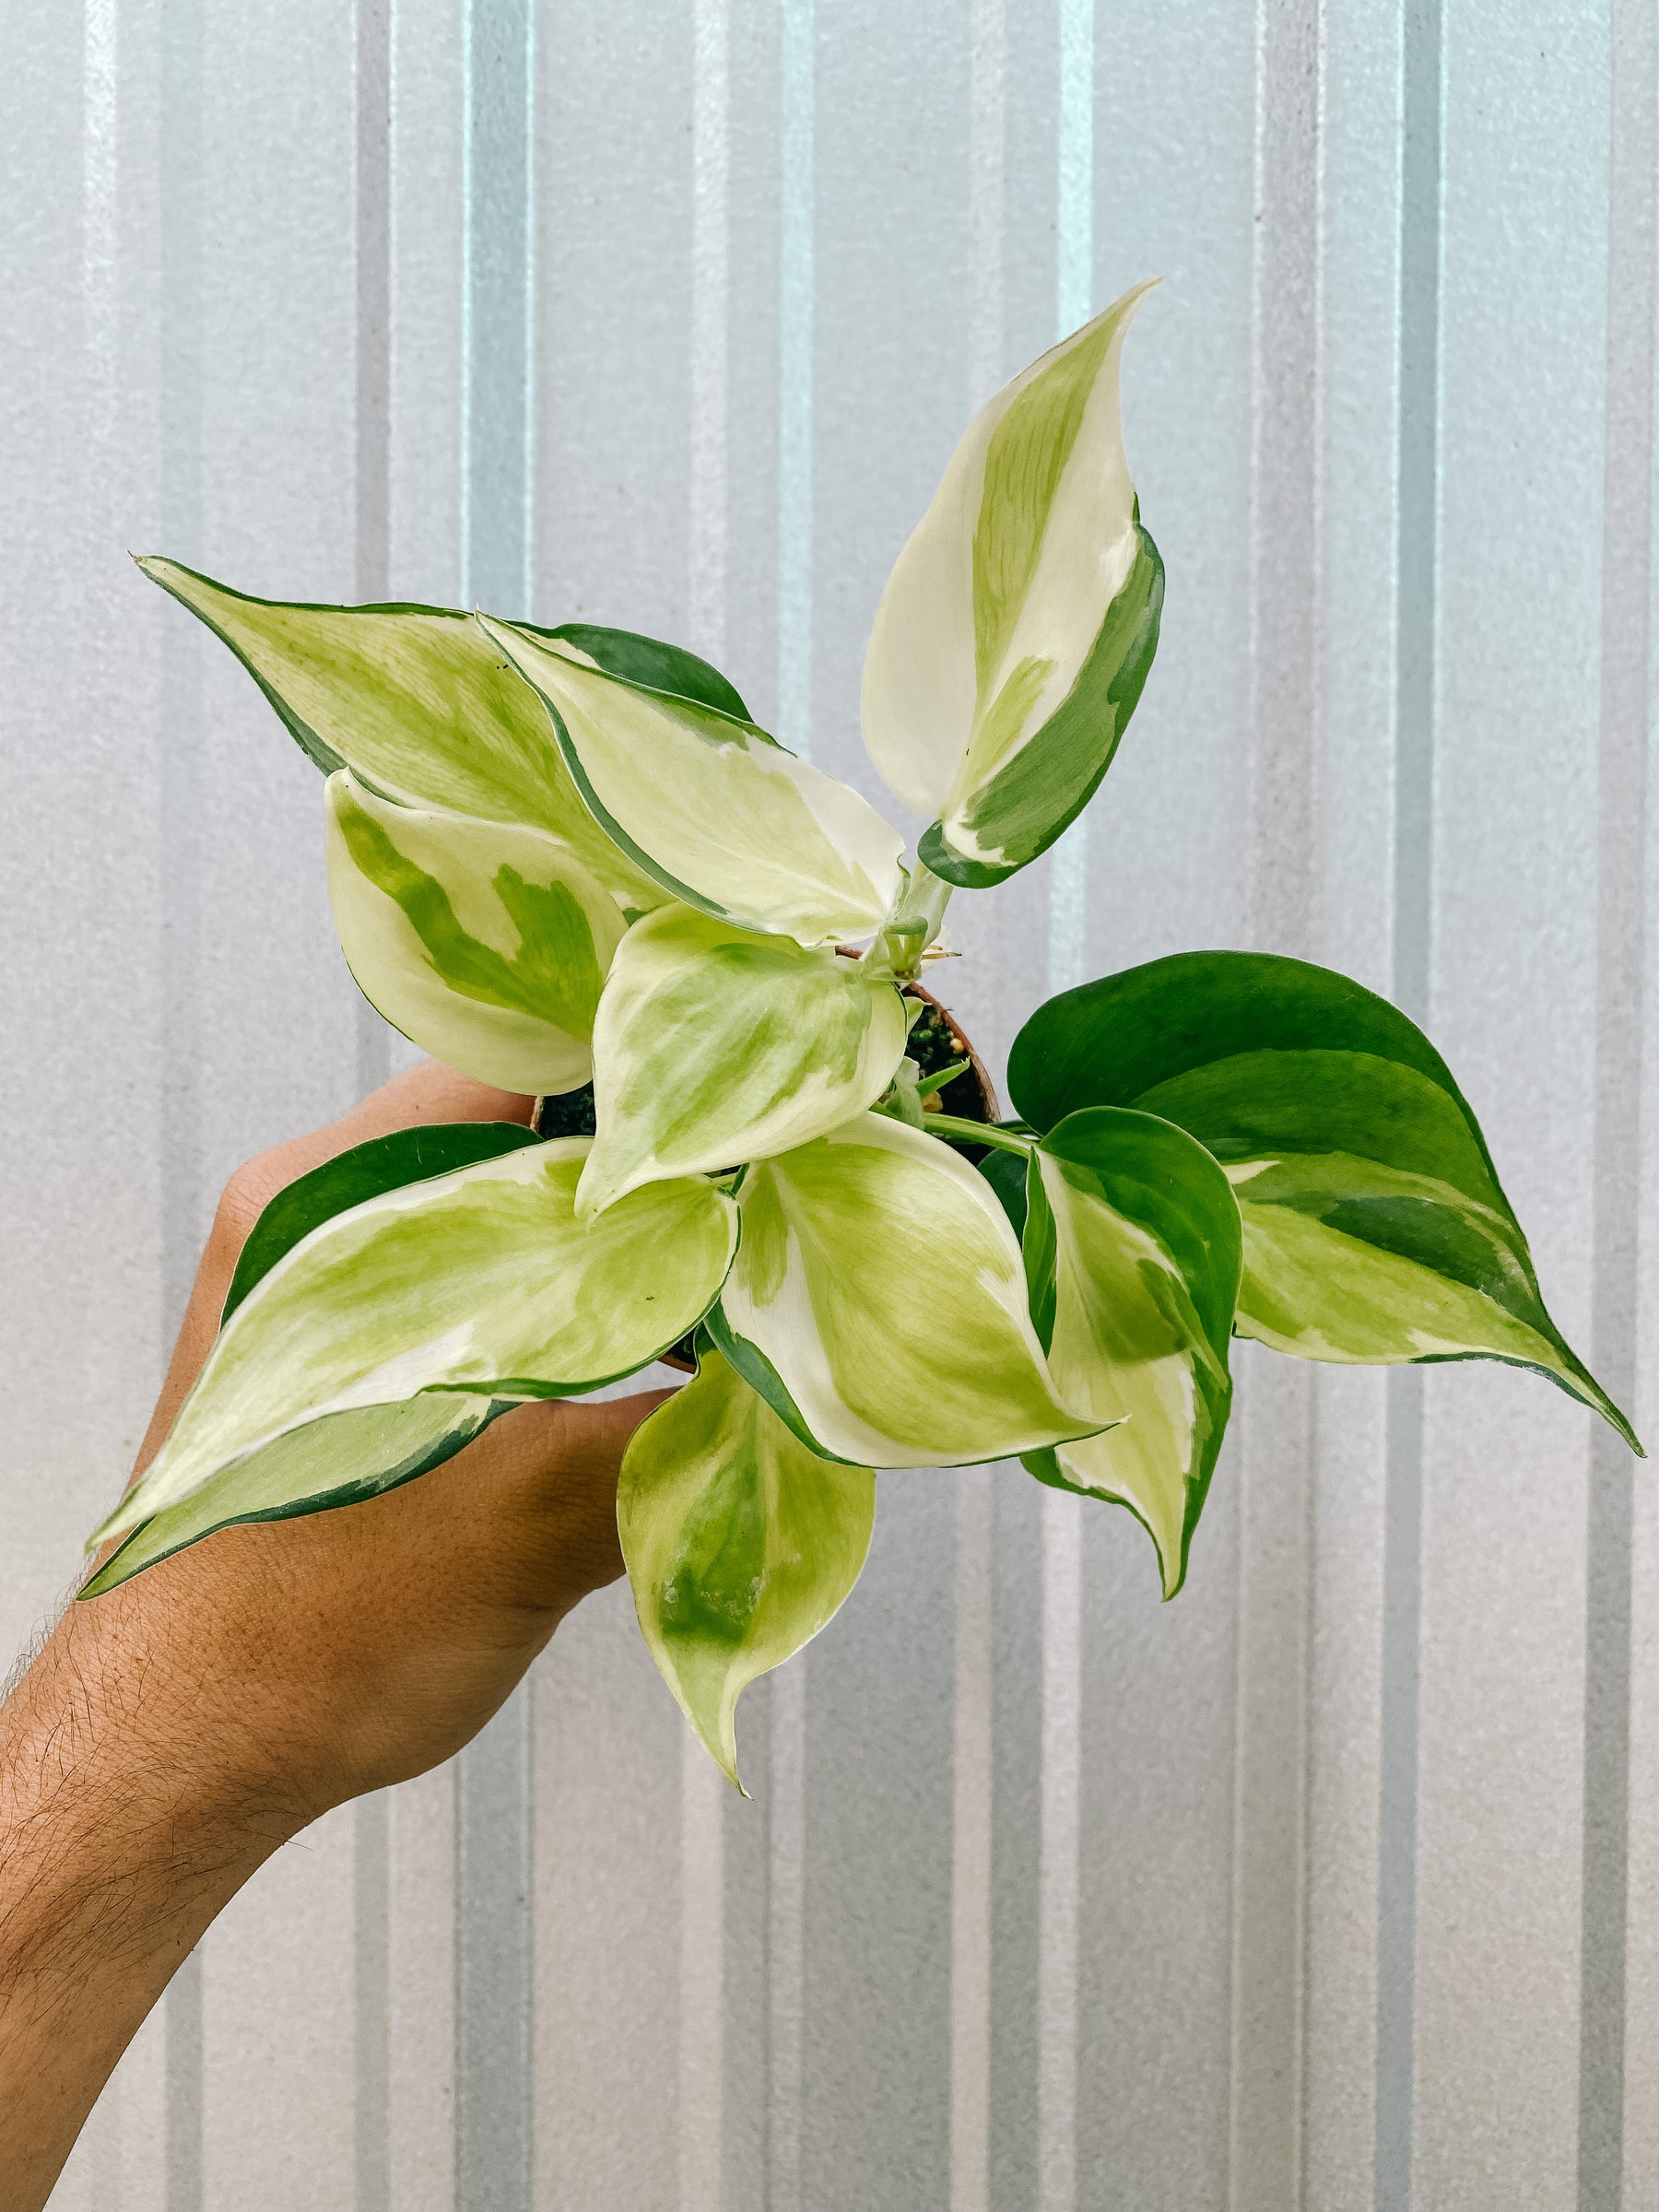 3" Philodendron 'Julie' (Highly variegated Philodendron 'Cream Splash')